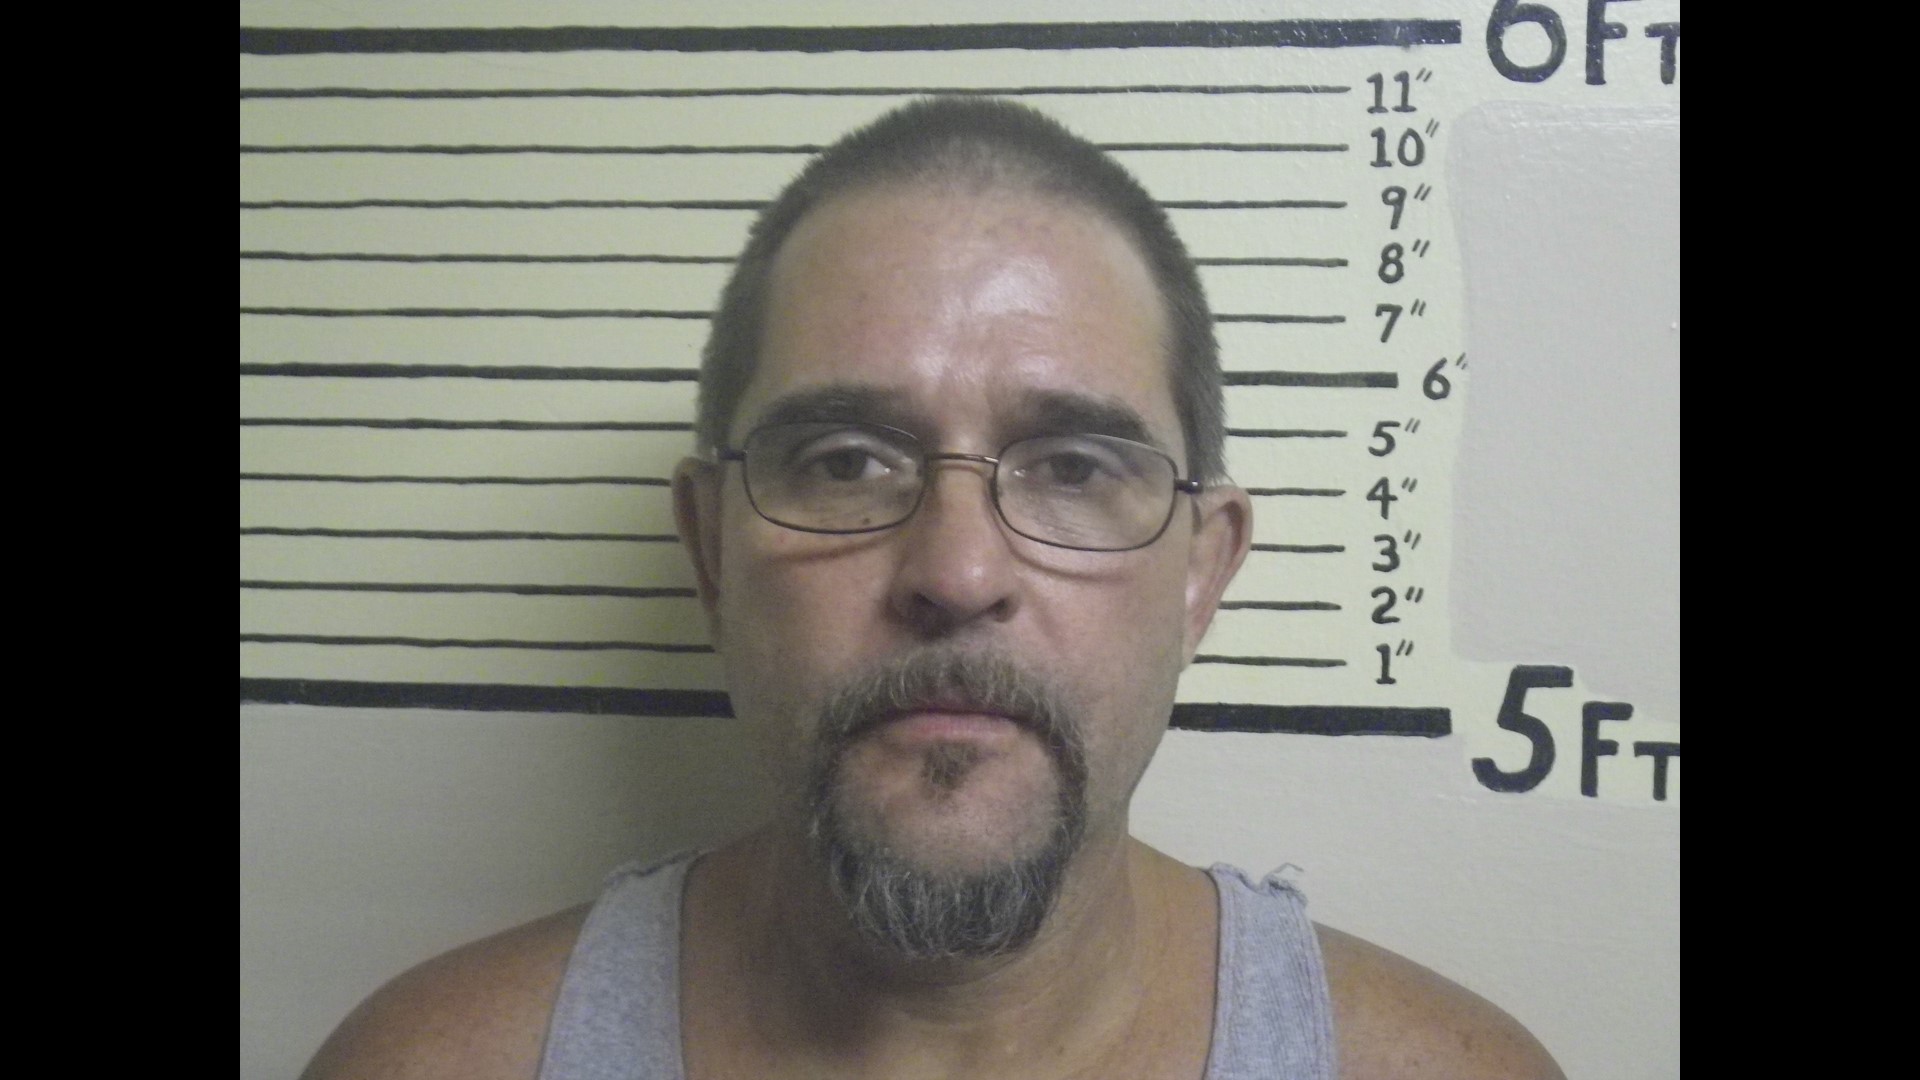 Henderson County Man Arrested On Several Meth Related Charges